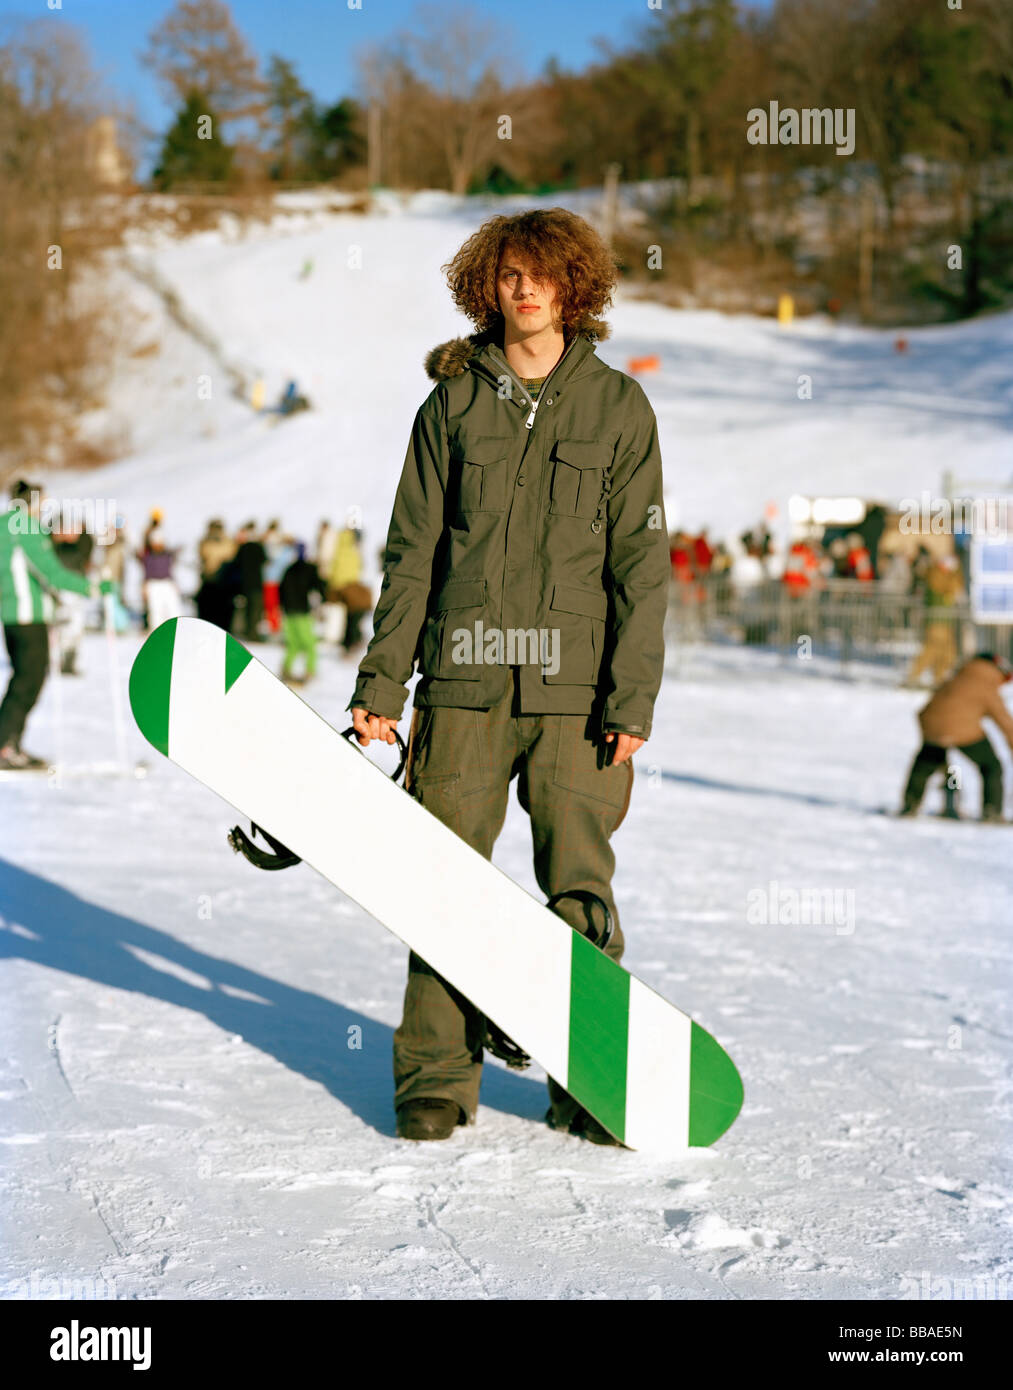 A young man standing with a snowboard at a ski resort, Mountain Creek, New  Jersey, USA Stock Photo - Alamy